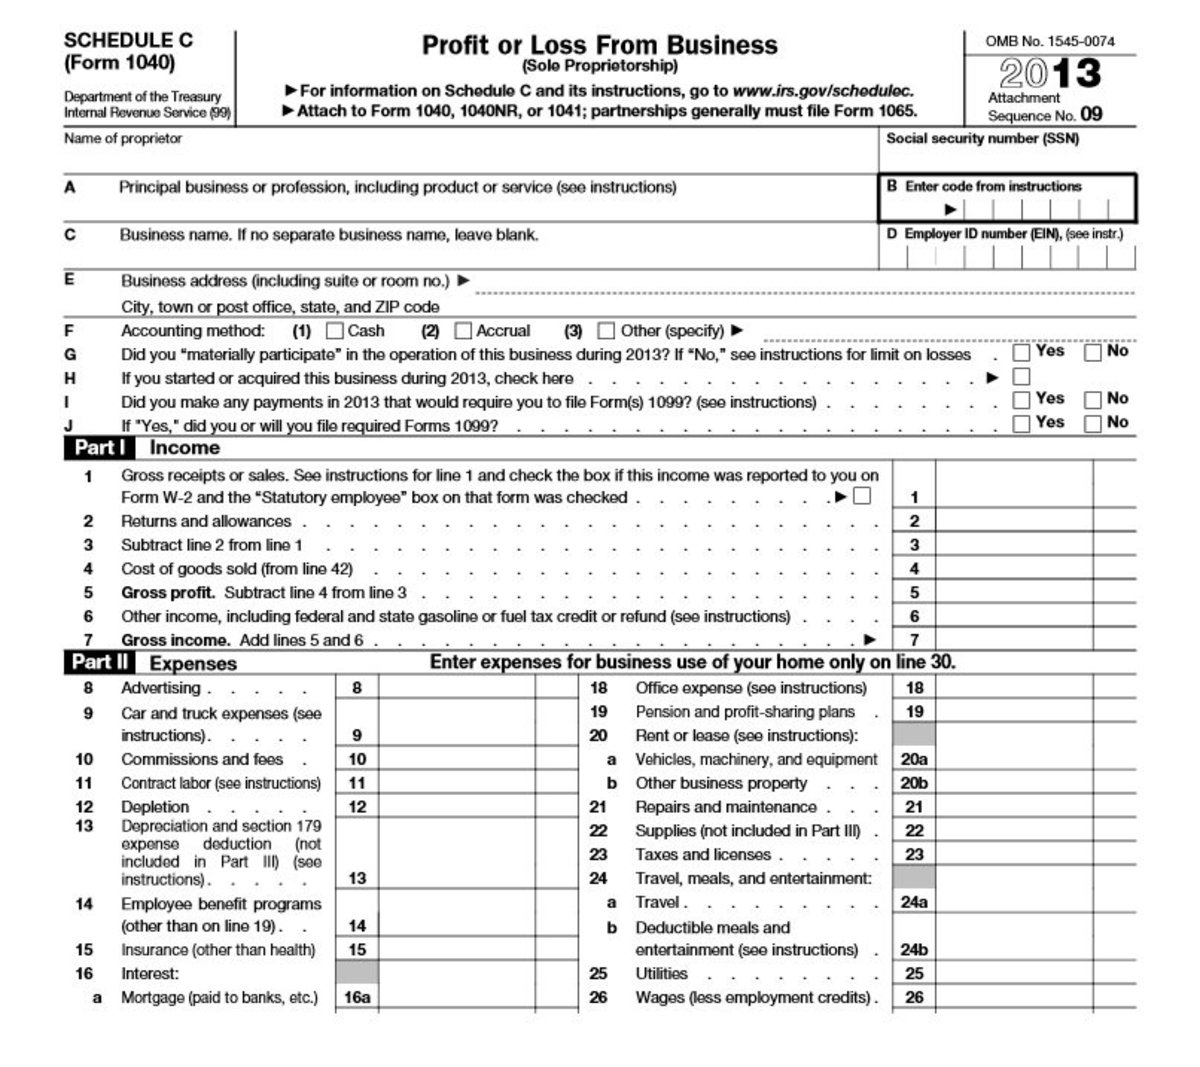 Tax Form Schedule C - Used for recording business revenue and expense